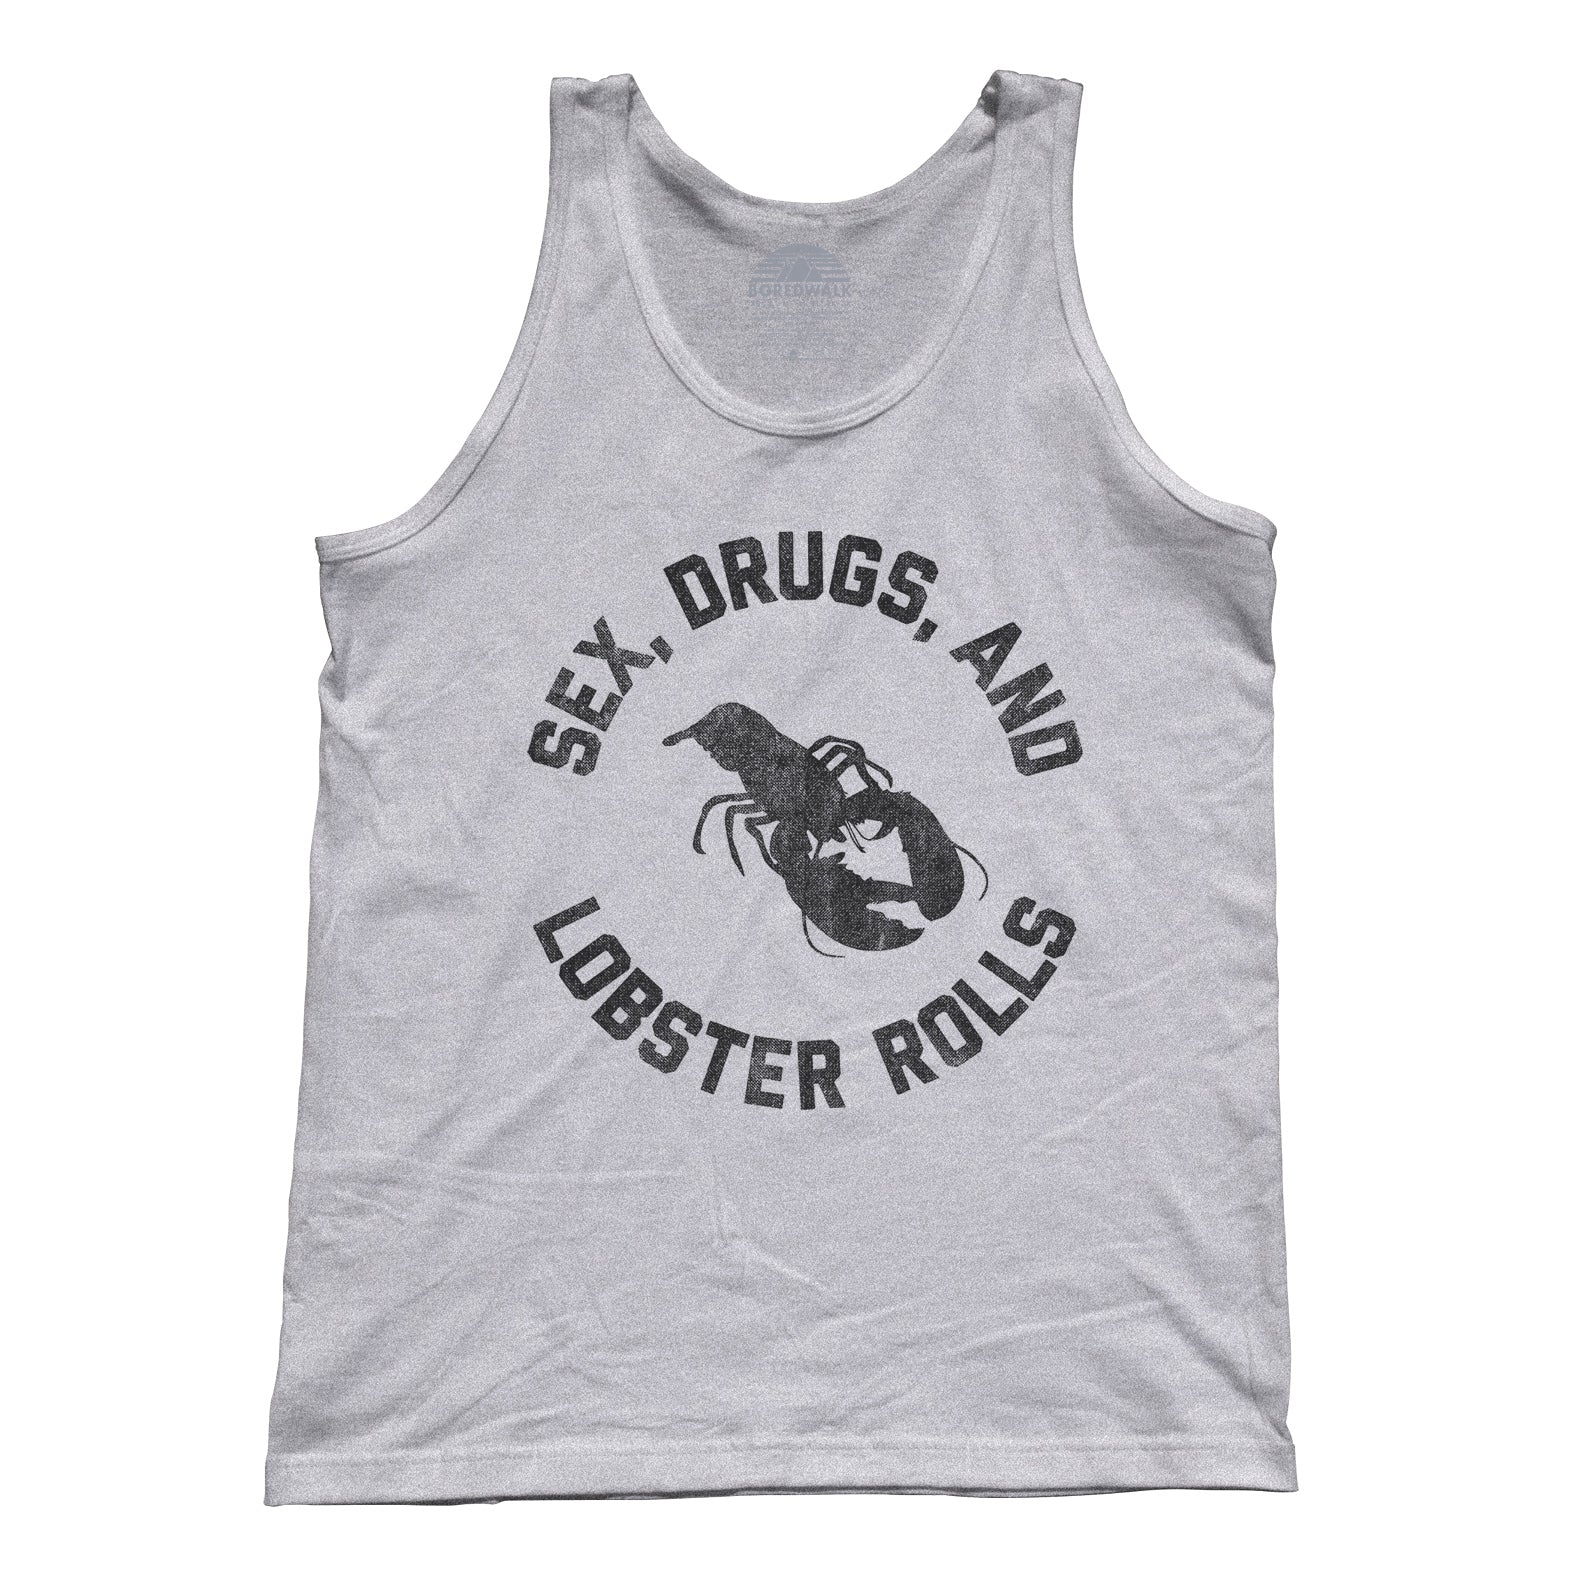 Unisex Sex Drugs and Lobster Rolls Tank